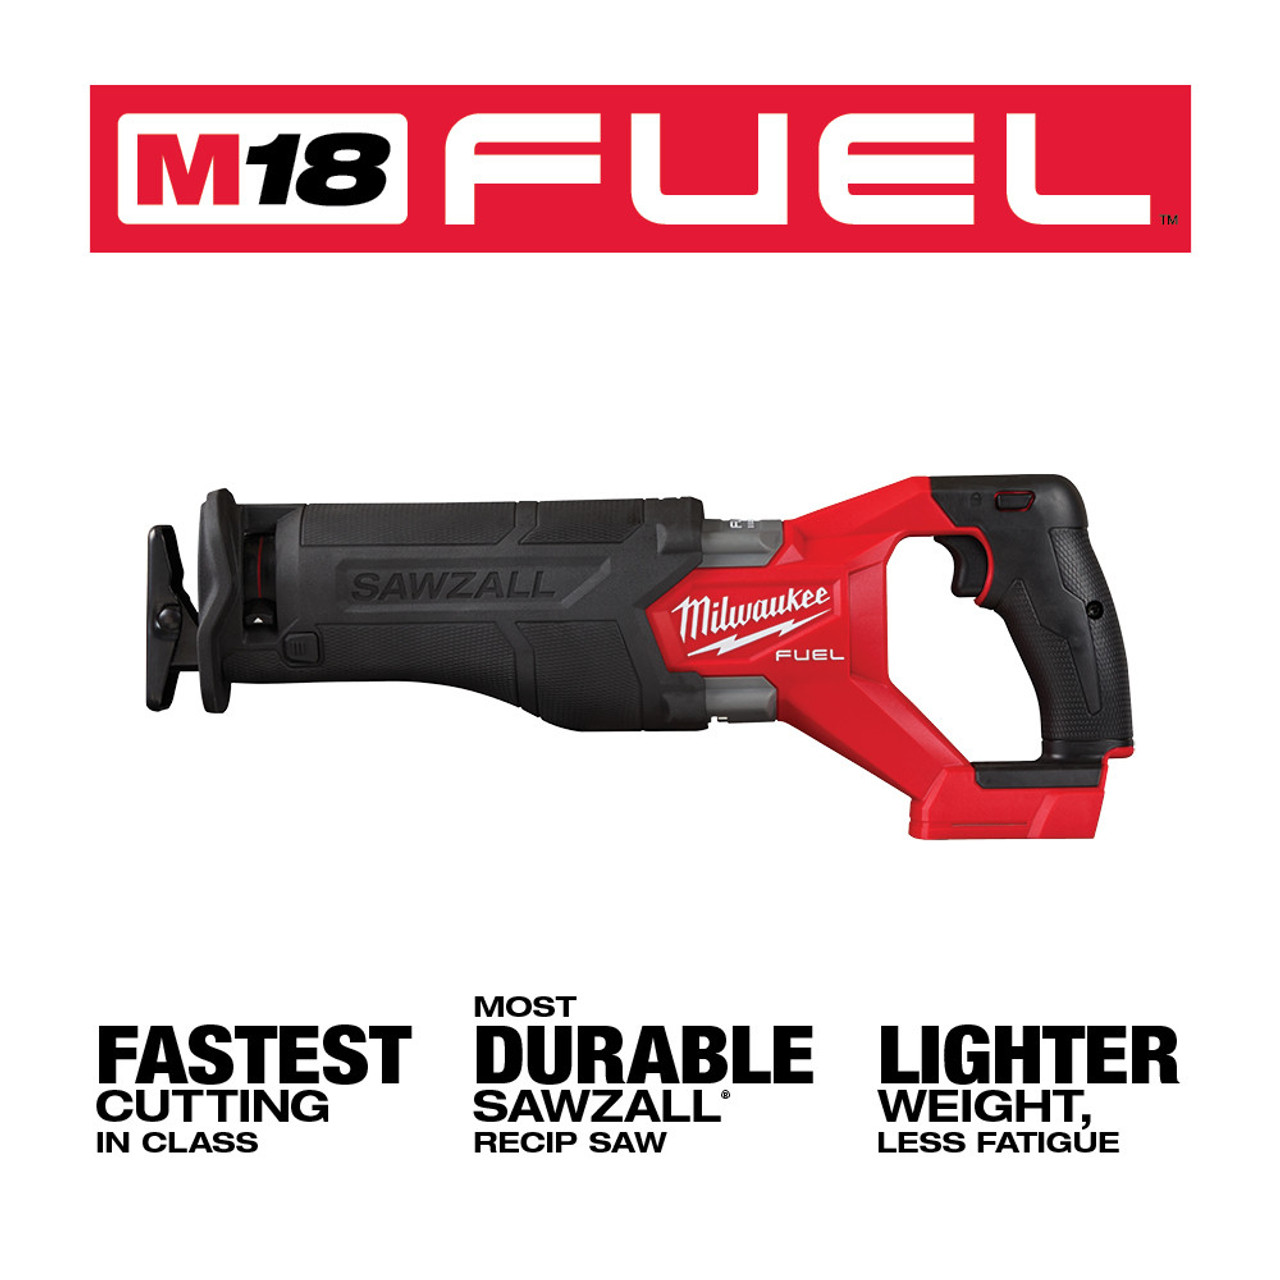 M18 FUEL 18 Volt Lithium-Ion Brushless Cordless SAWZALL Reciprocating Saw  Tool Only